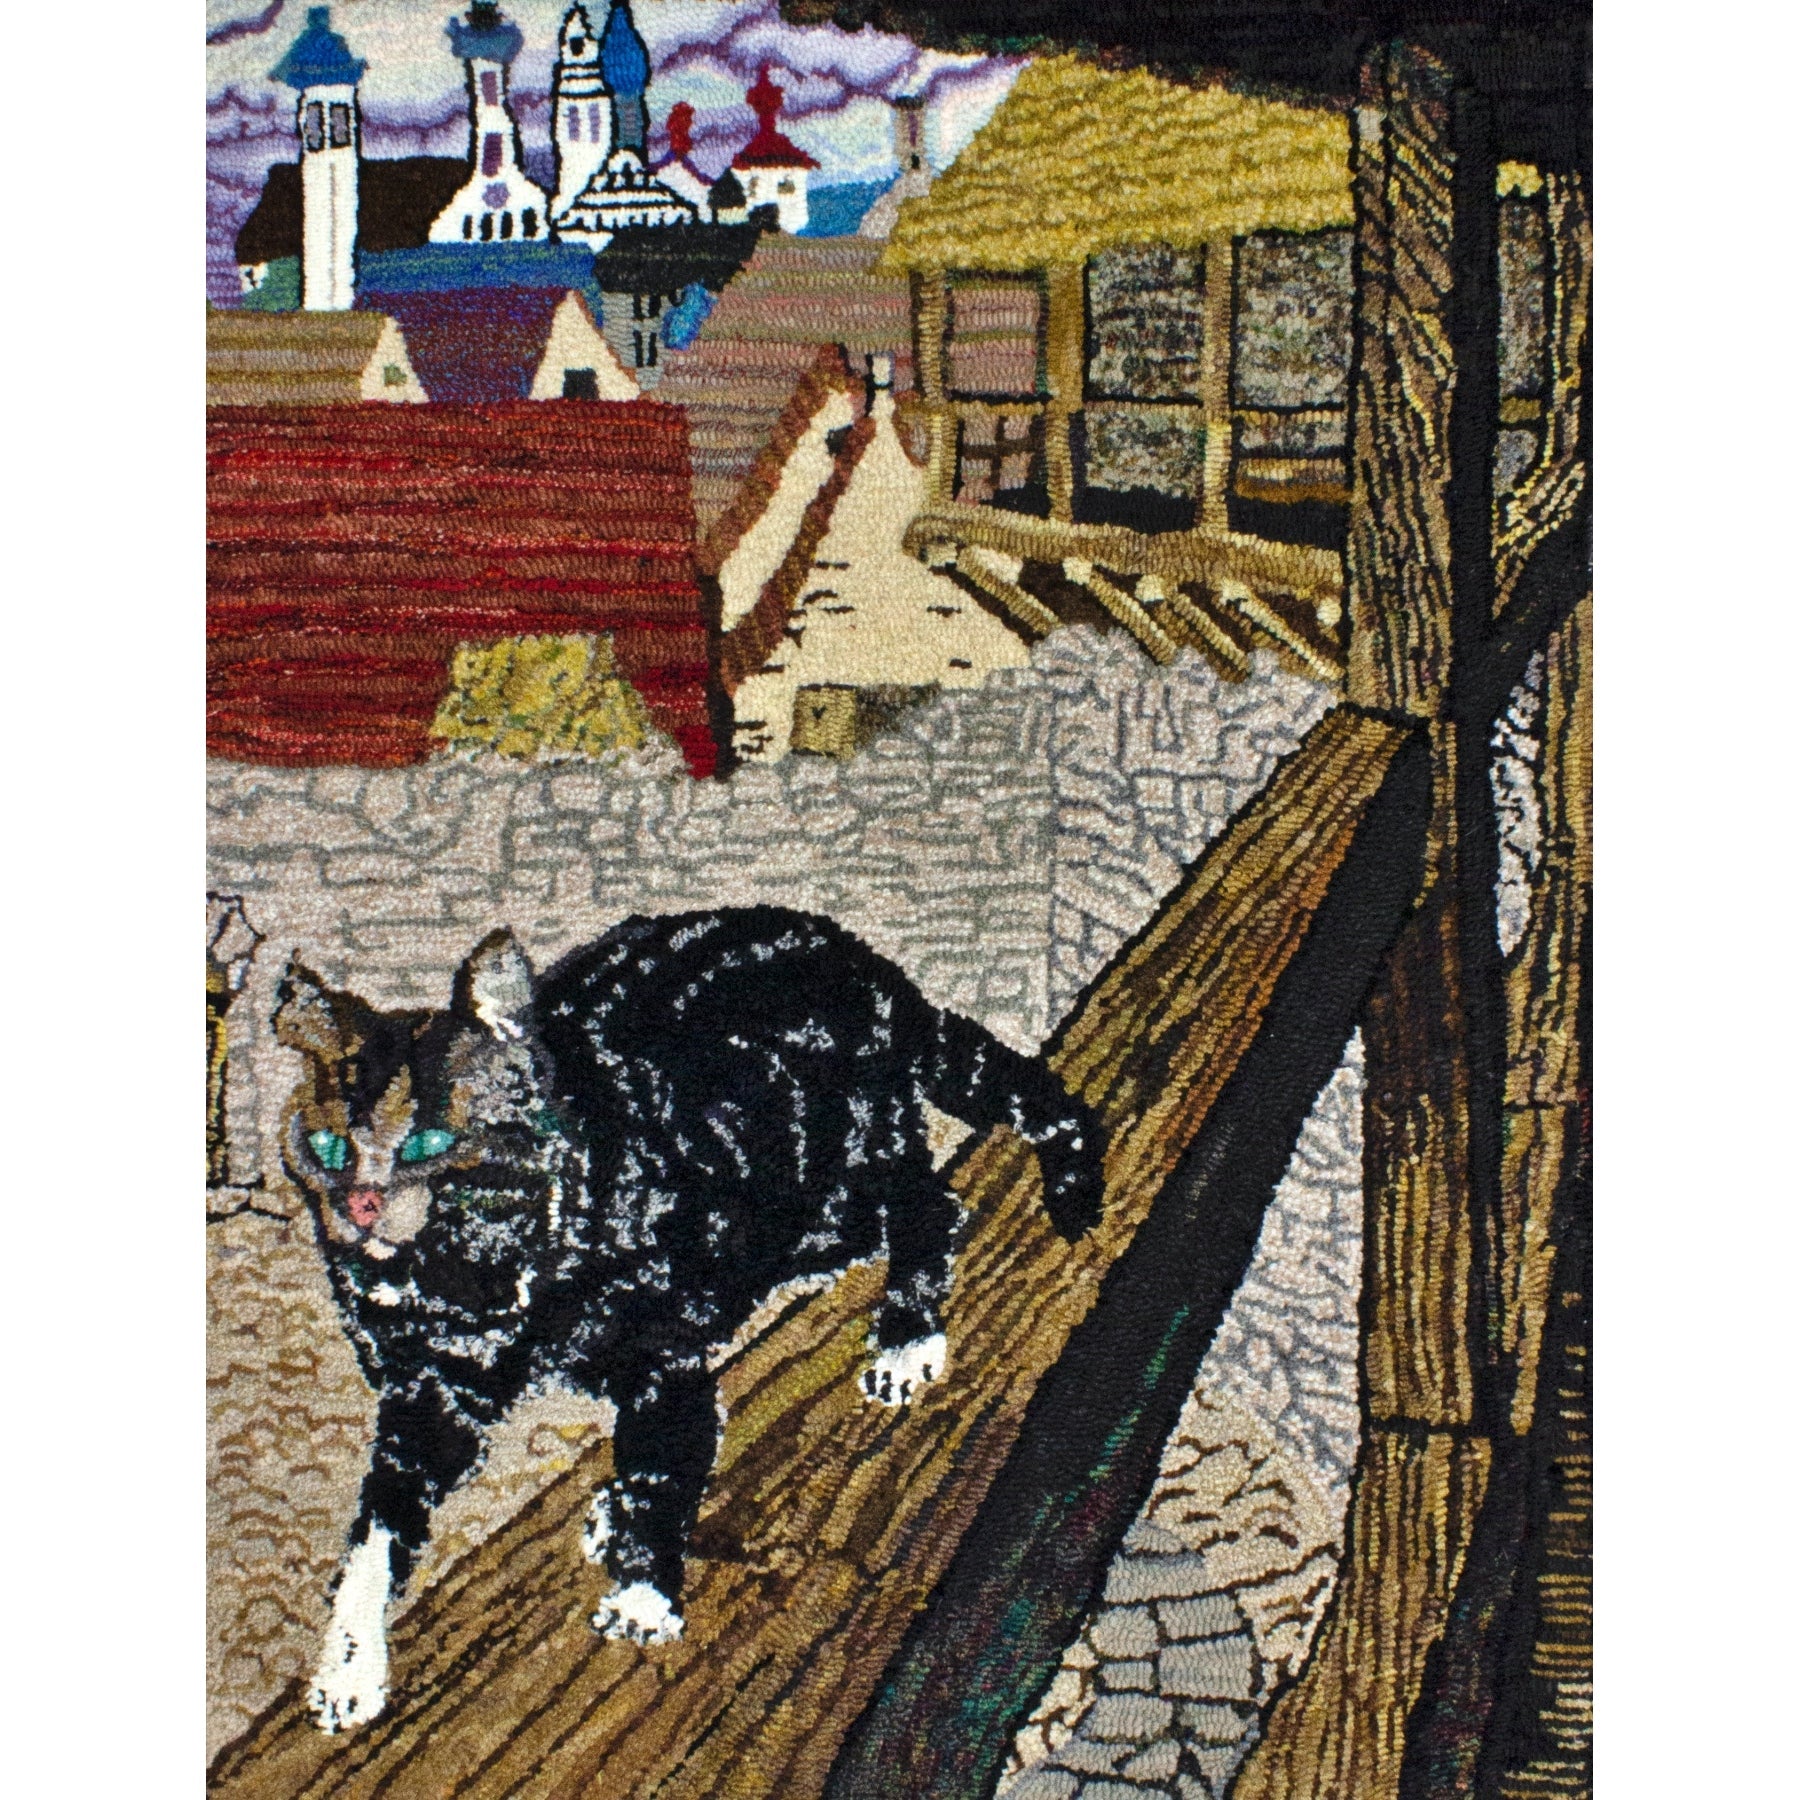 The Cat and the Mouse in Partnership, ill.  Arthur Rackham, 1909, rug hooked by Nancy Zuese